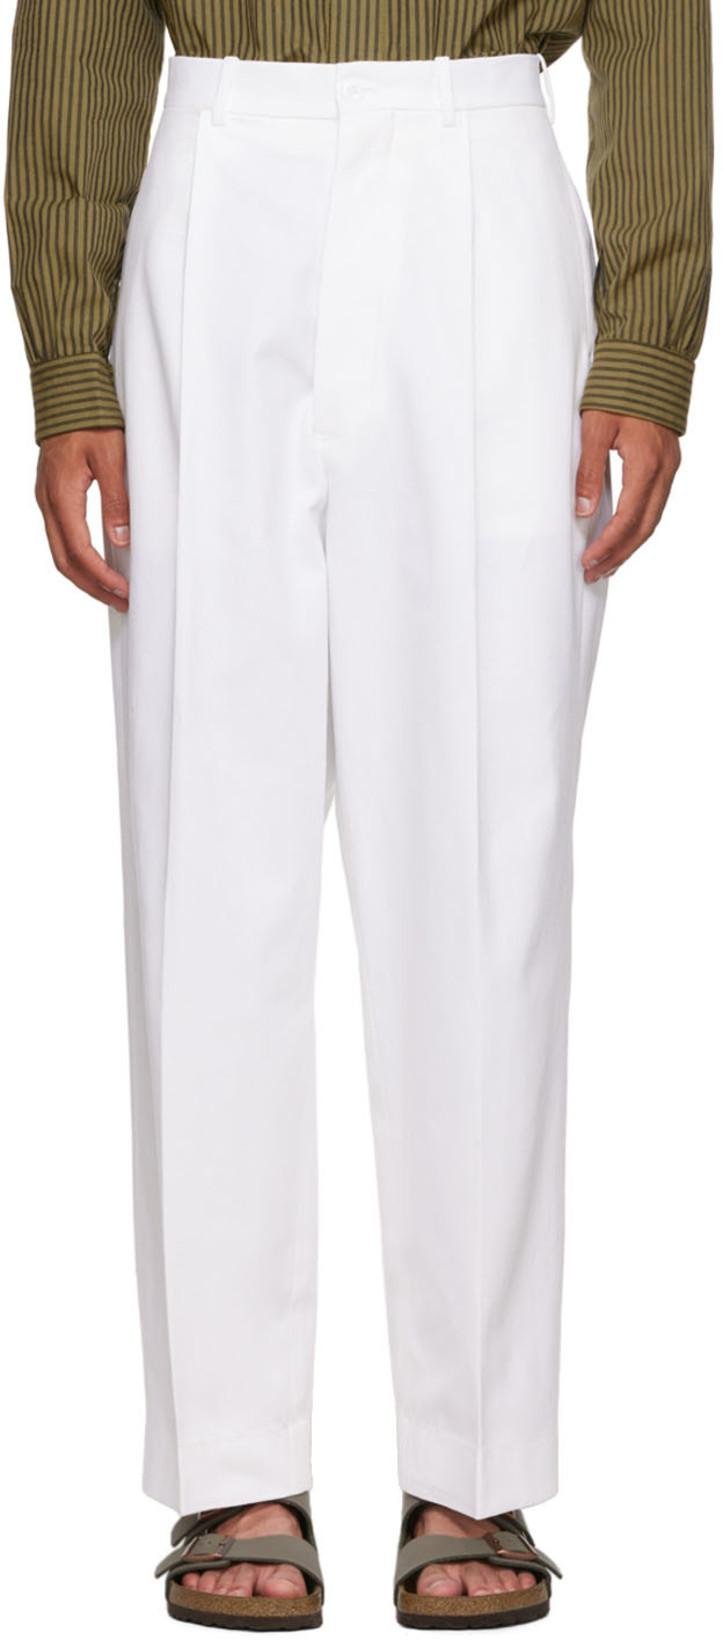 White Pleated Trousers by CONNOR MC KNIGHT